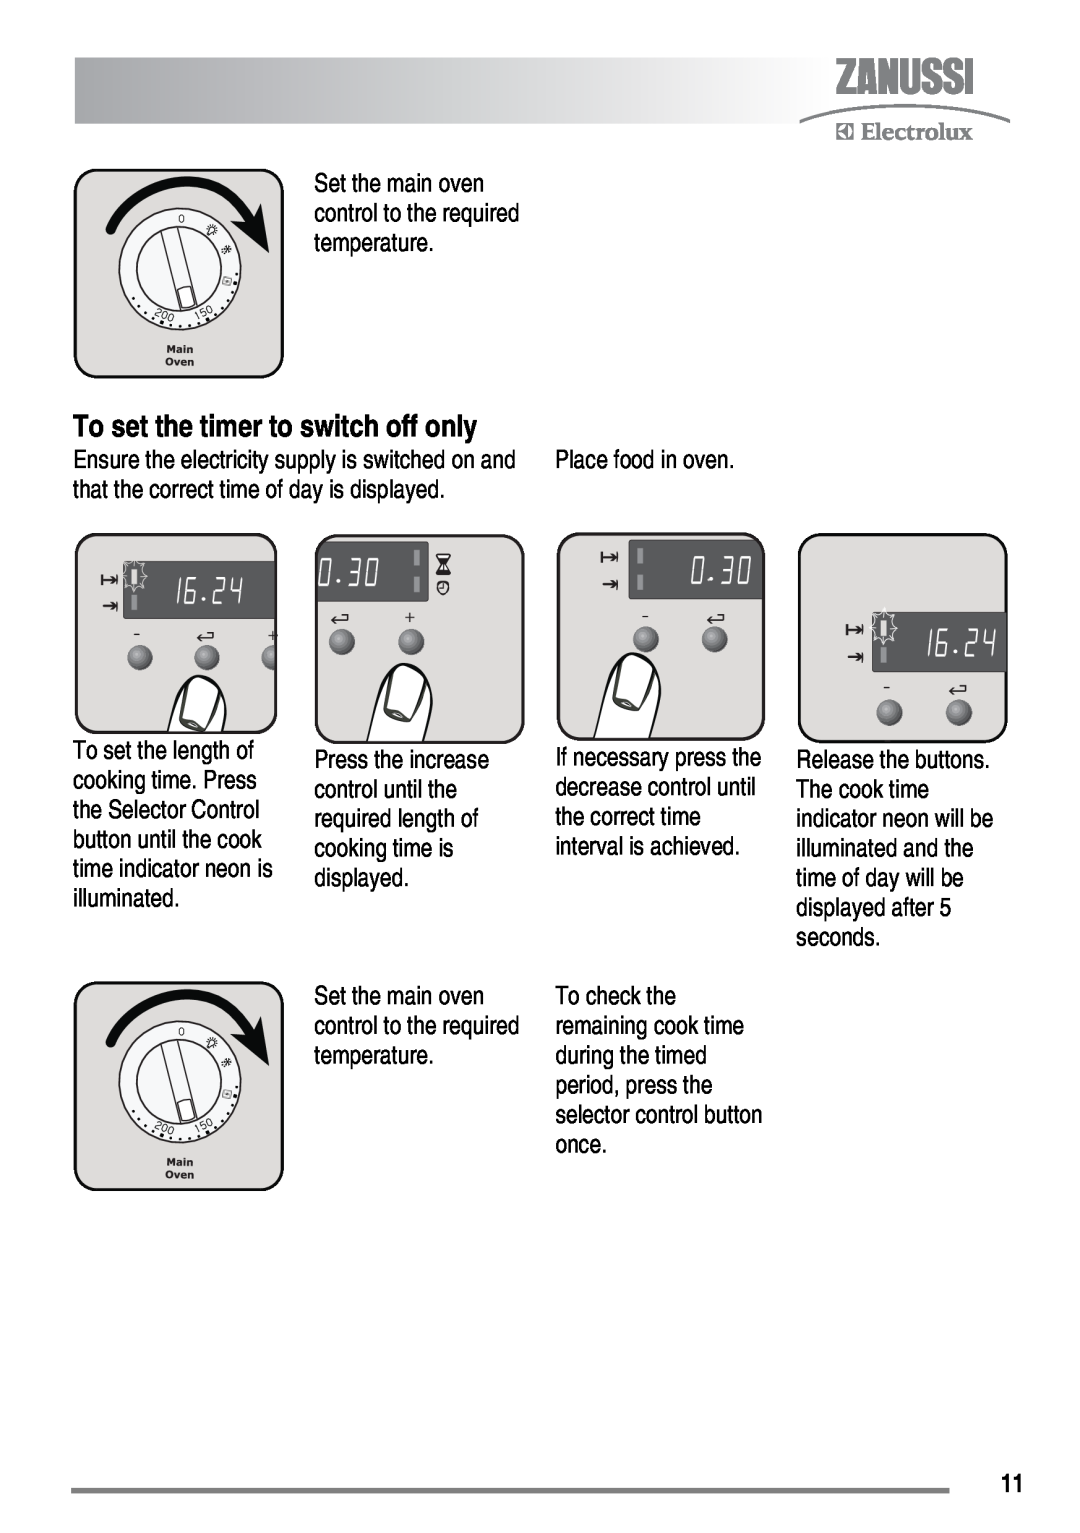 Zanussi ZKM6040 user manual To set the timer to switch off only, control to the required 